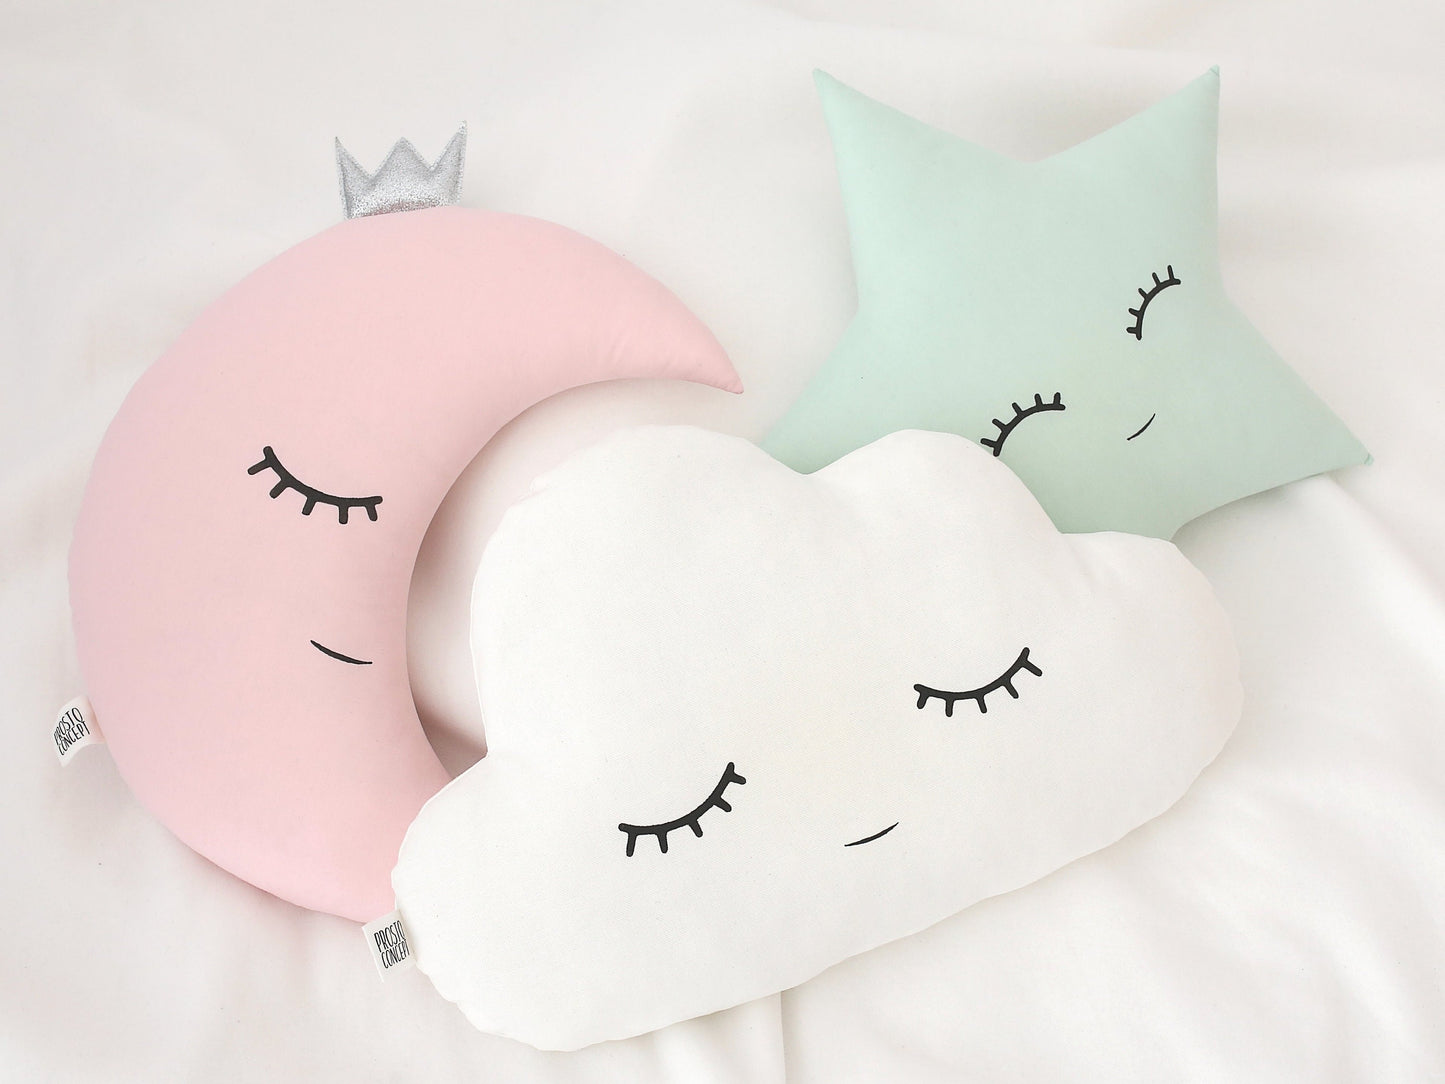 Set of 3 Pillows - White Cloud, Pale Pink Crescent Moon and Green Mint Star Pillows